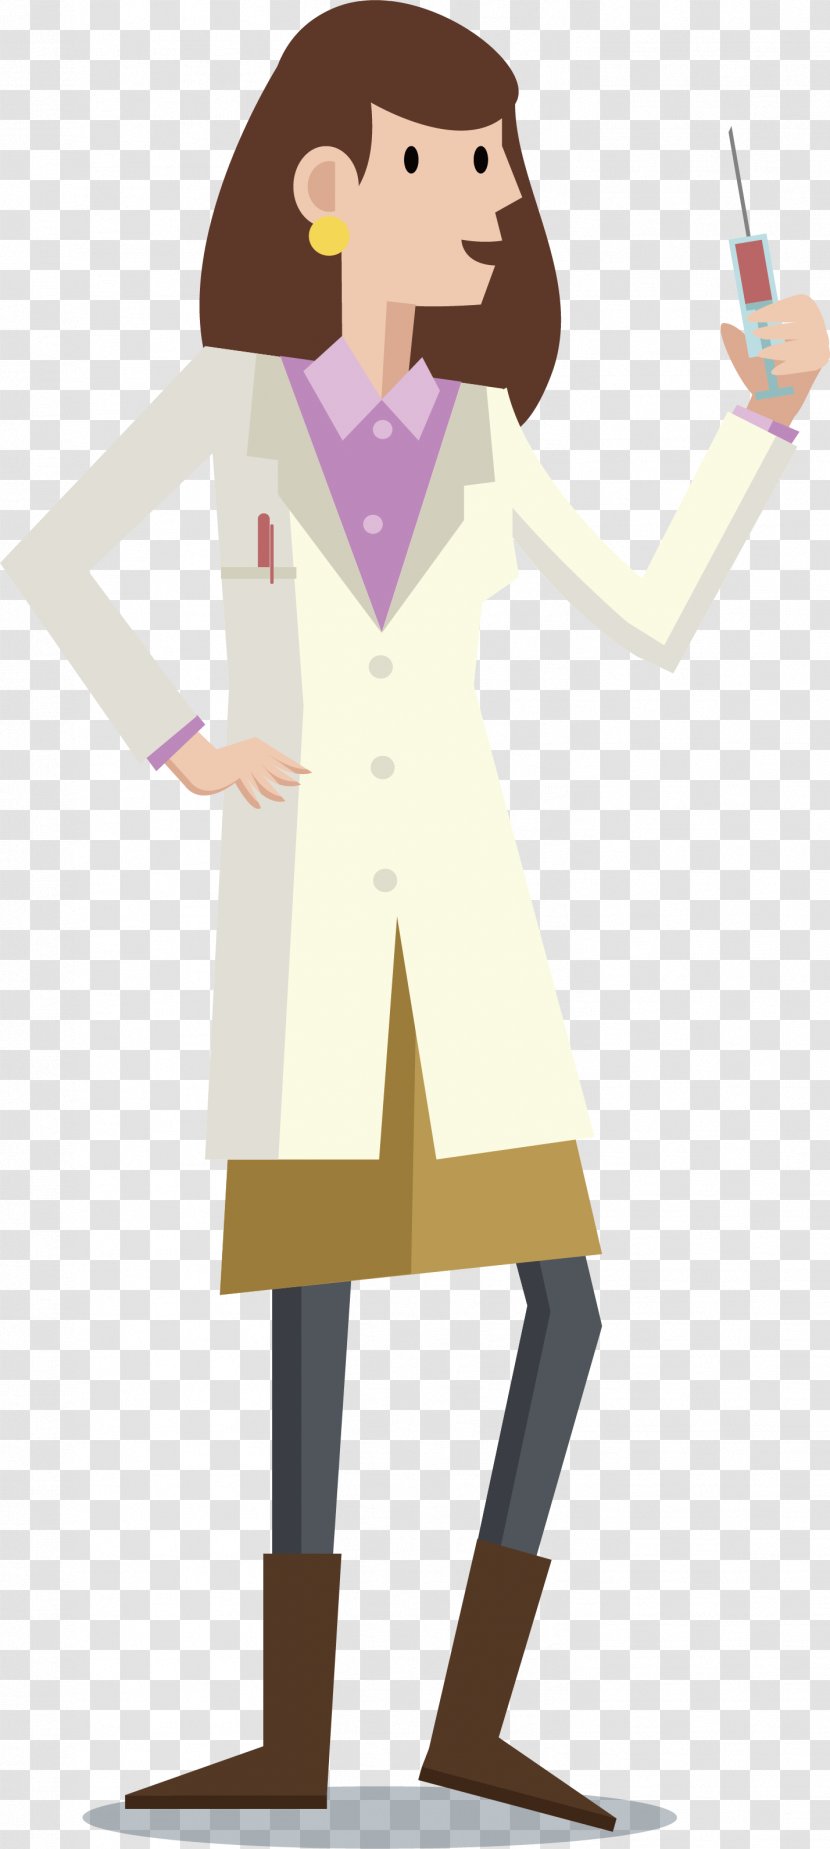 Injection Physician Clip Art - Tree - A Doctor With Needle Transparent PNG